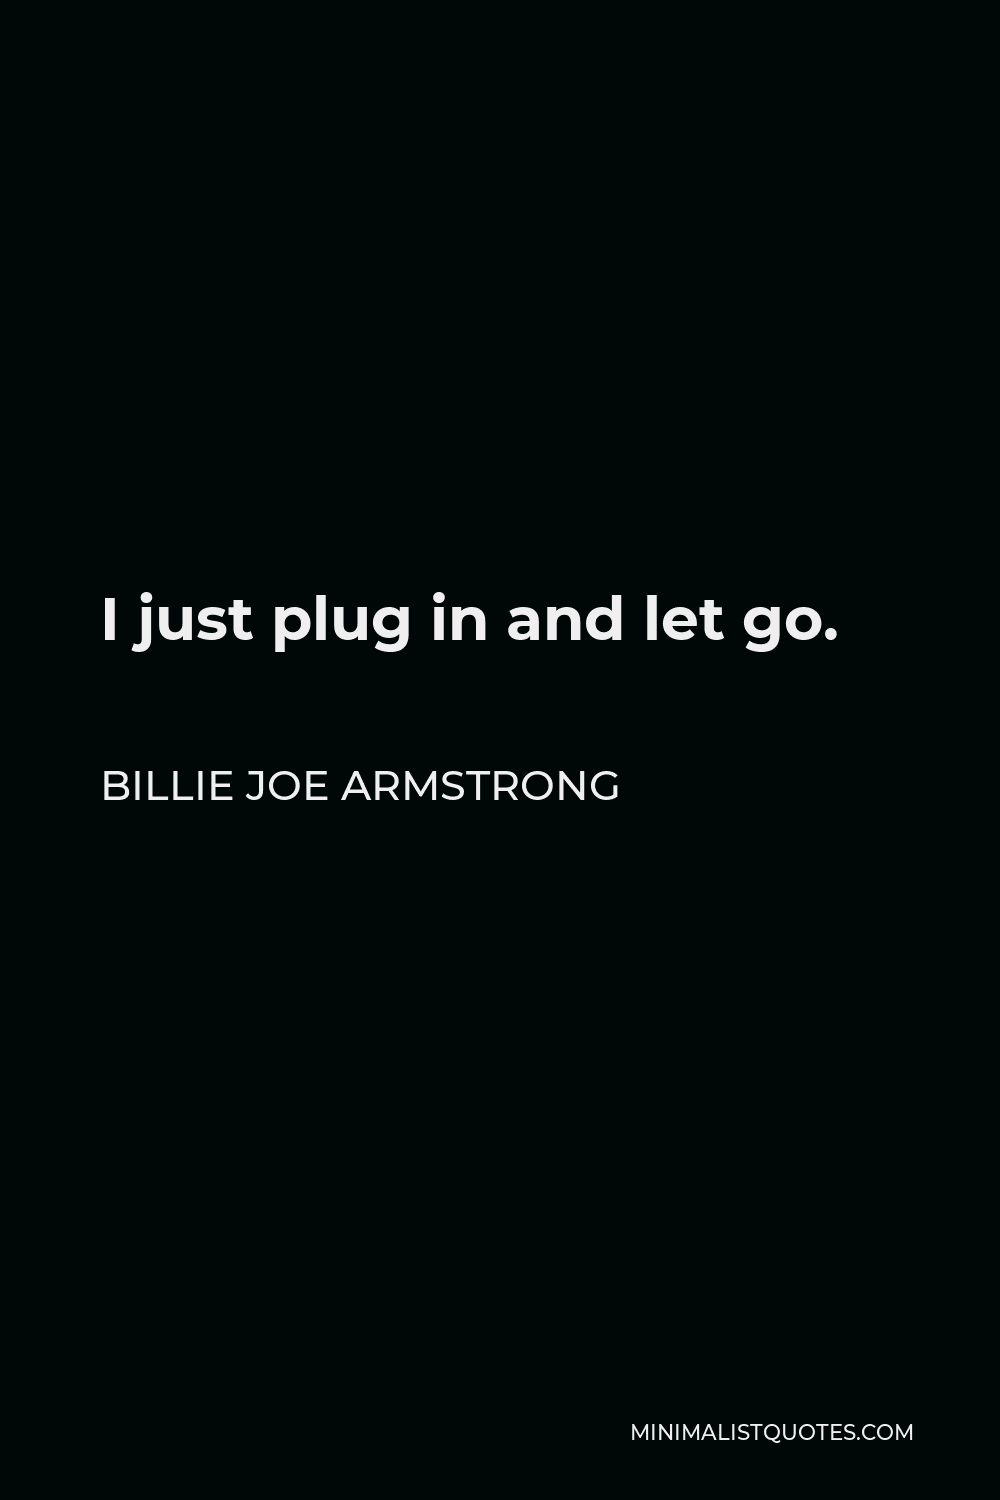 Billie Joe Armstrong Quote - I just plug in and let go.